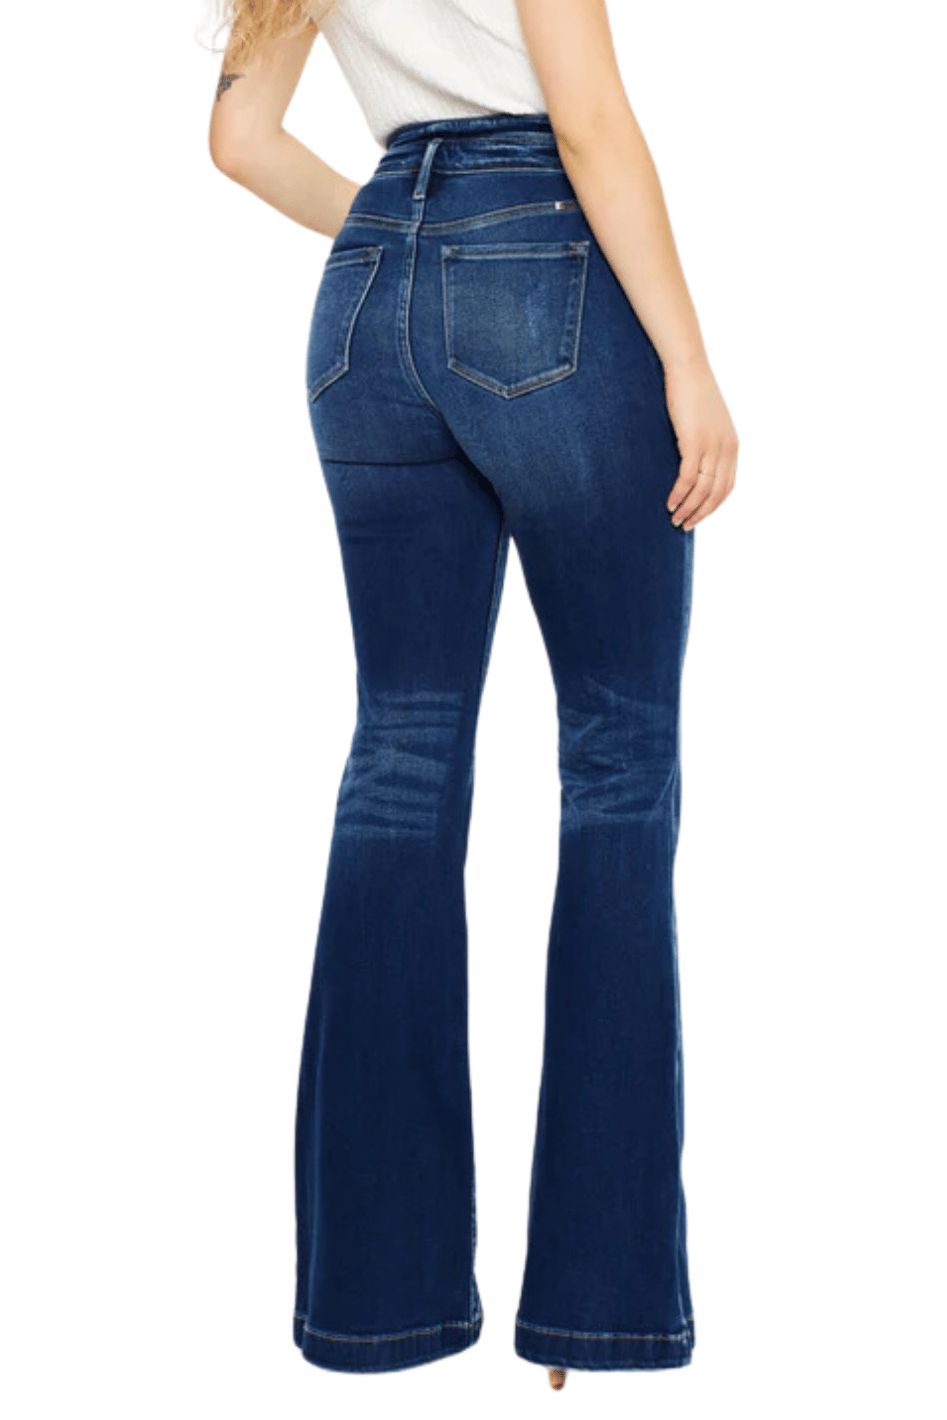 Blairen Curvy Button Fly Flare Jeans - Expressive Collective CO.